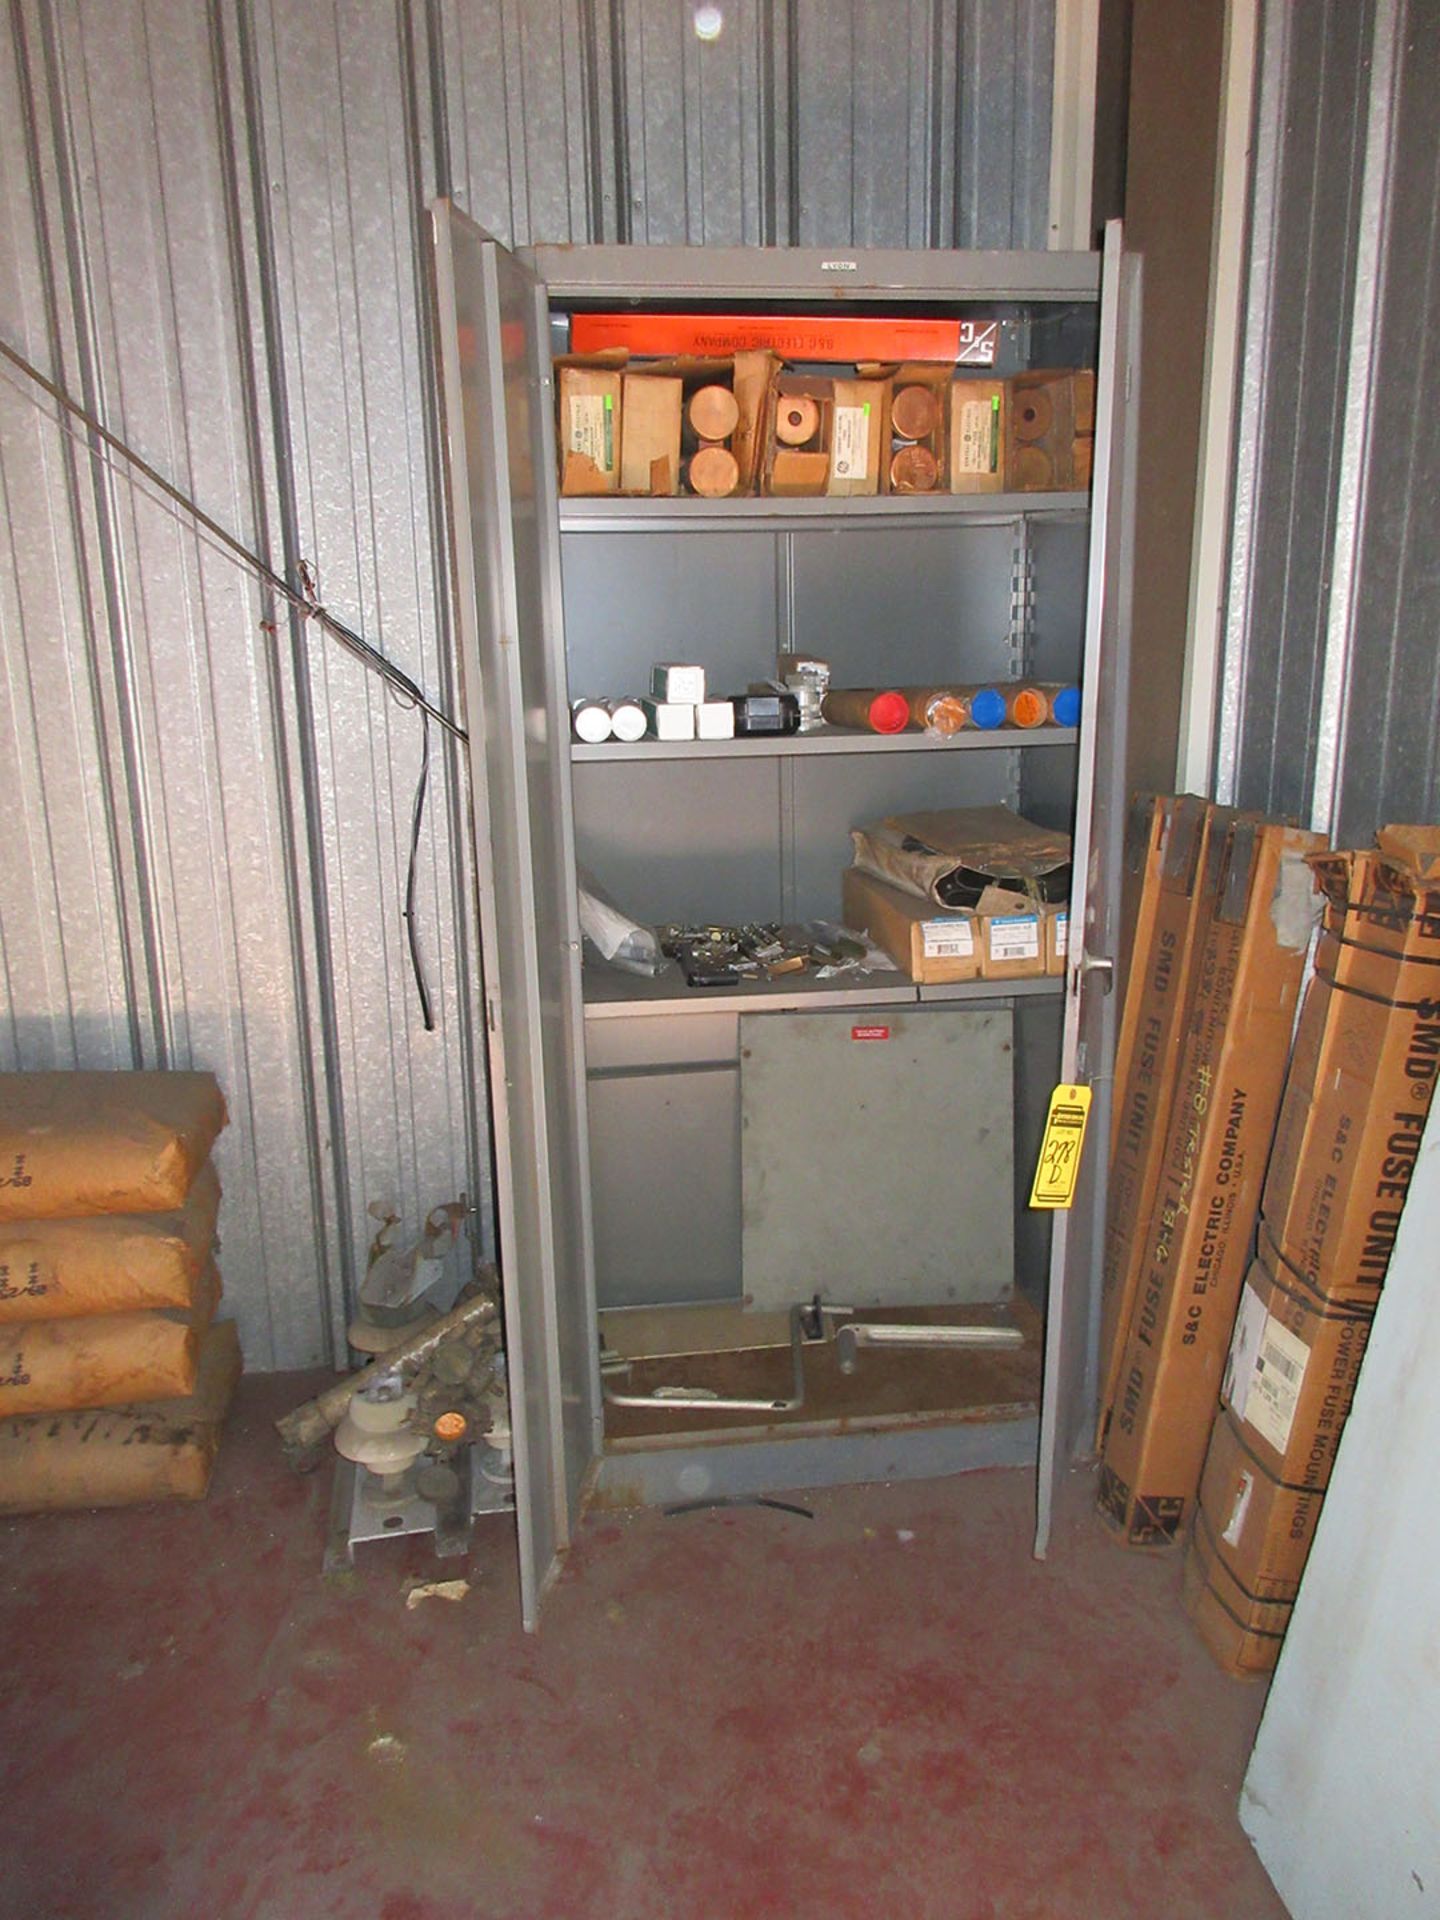 REMAINING CONTENTS OF ROOM; CABINET WITH FUSES, INSULATORS, AND OTHER ELECTRICAL SUPPLIES - Image 2 of 2